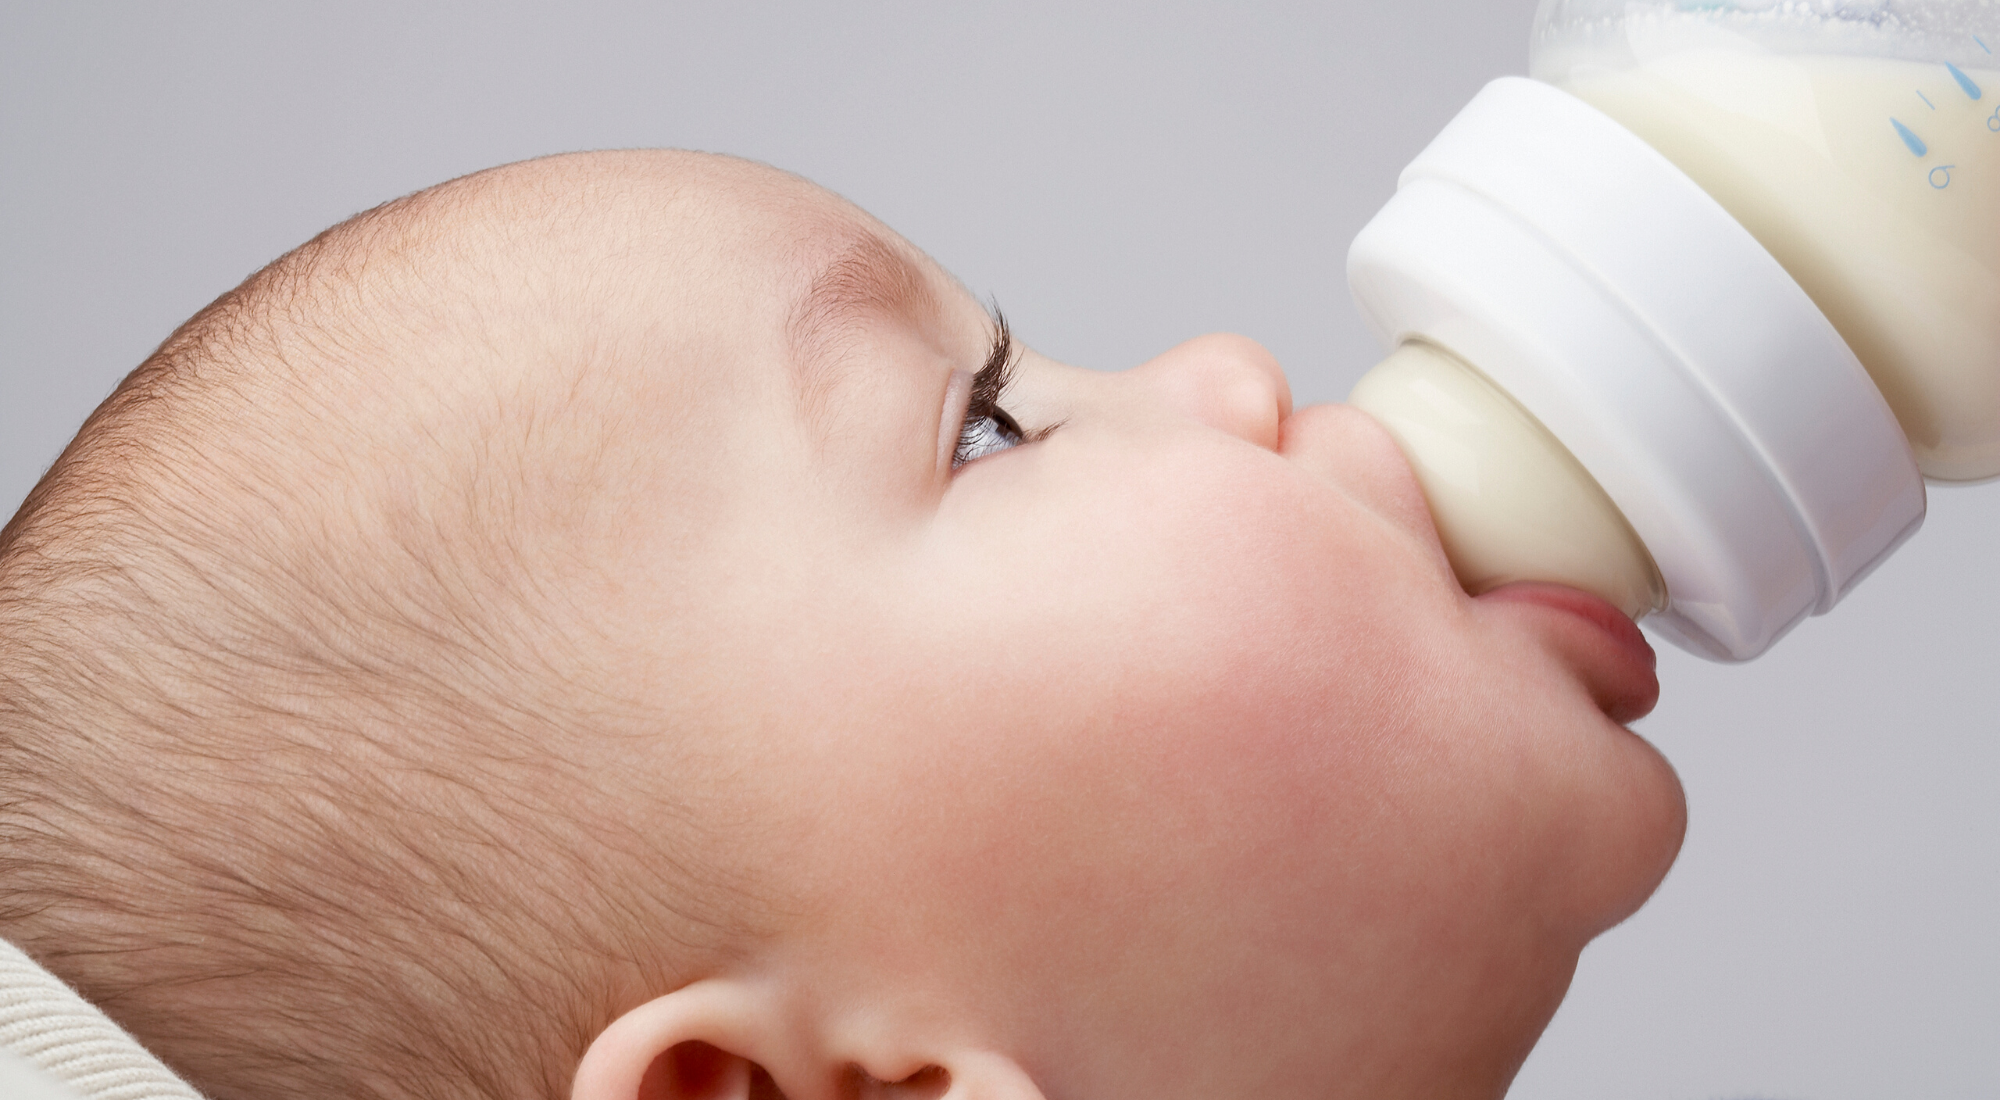 How to Bottle-Feed a Baby: Everything You Want to Know